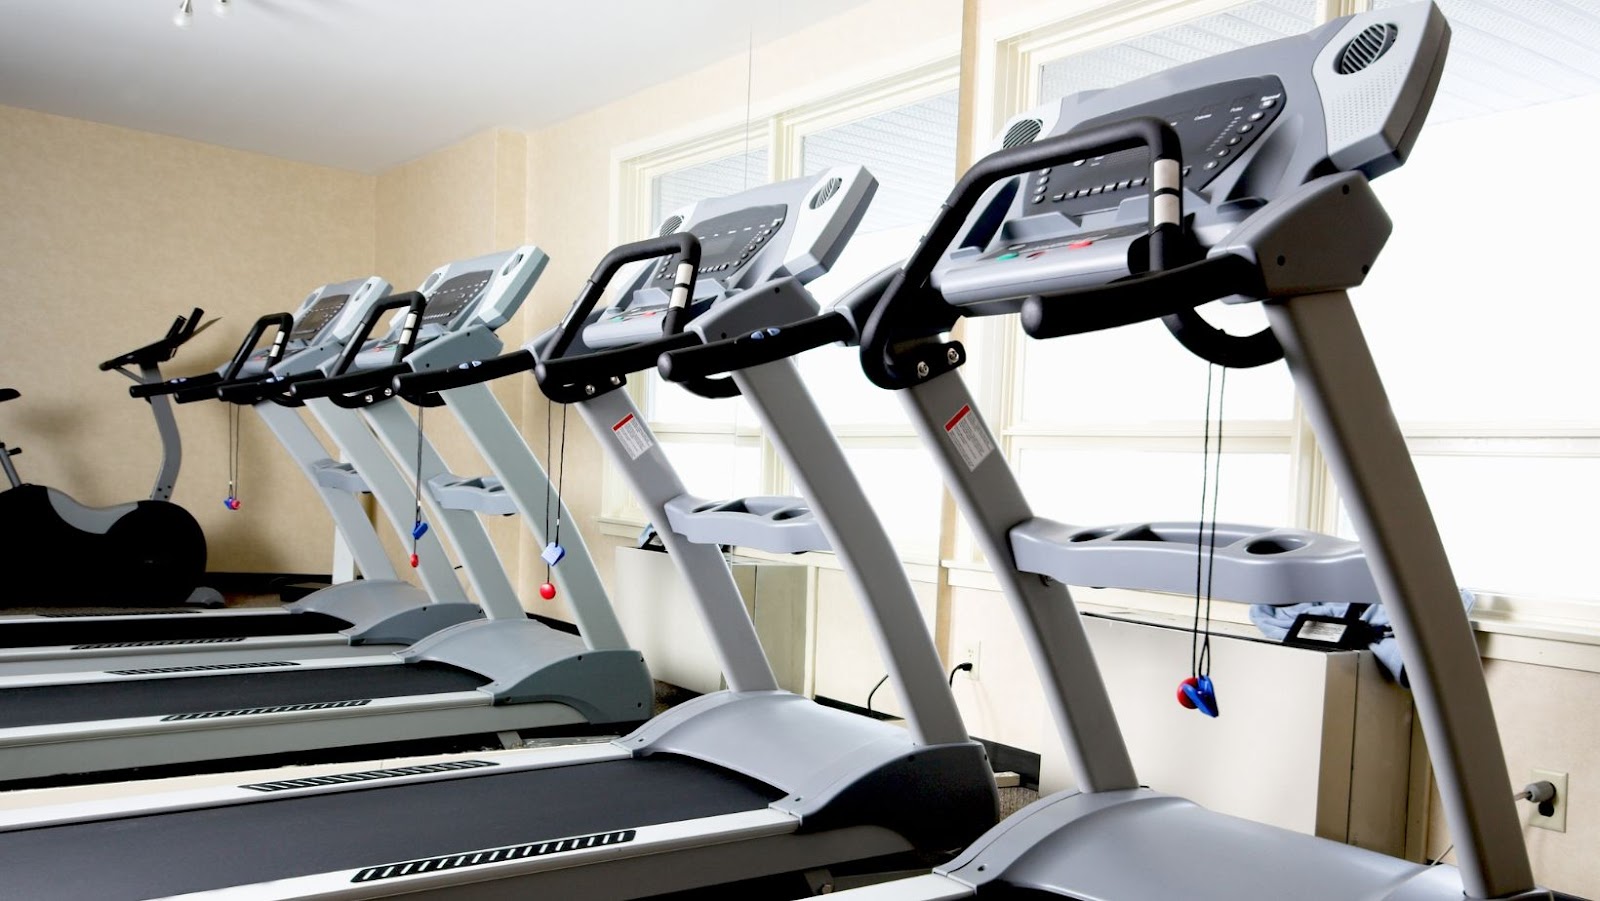 What Type of Lubricant Should you use on a Treadmill?